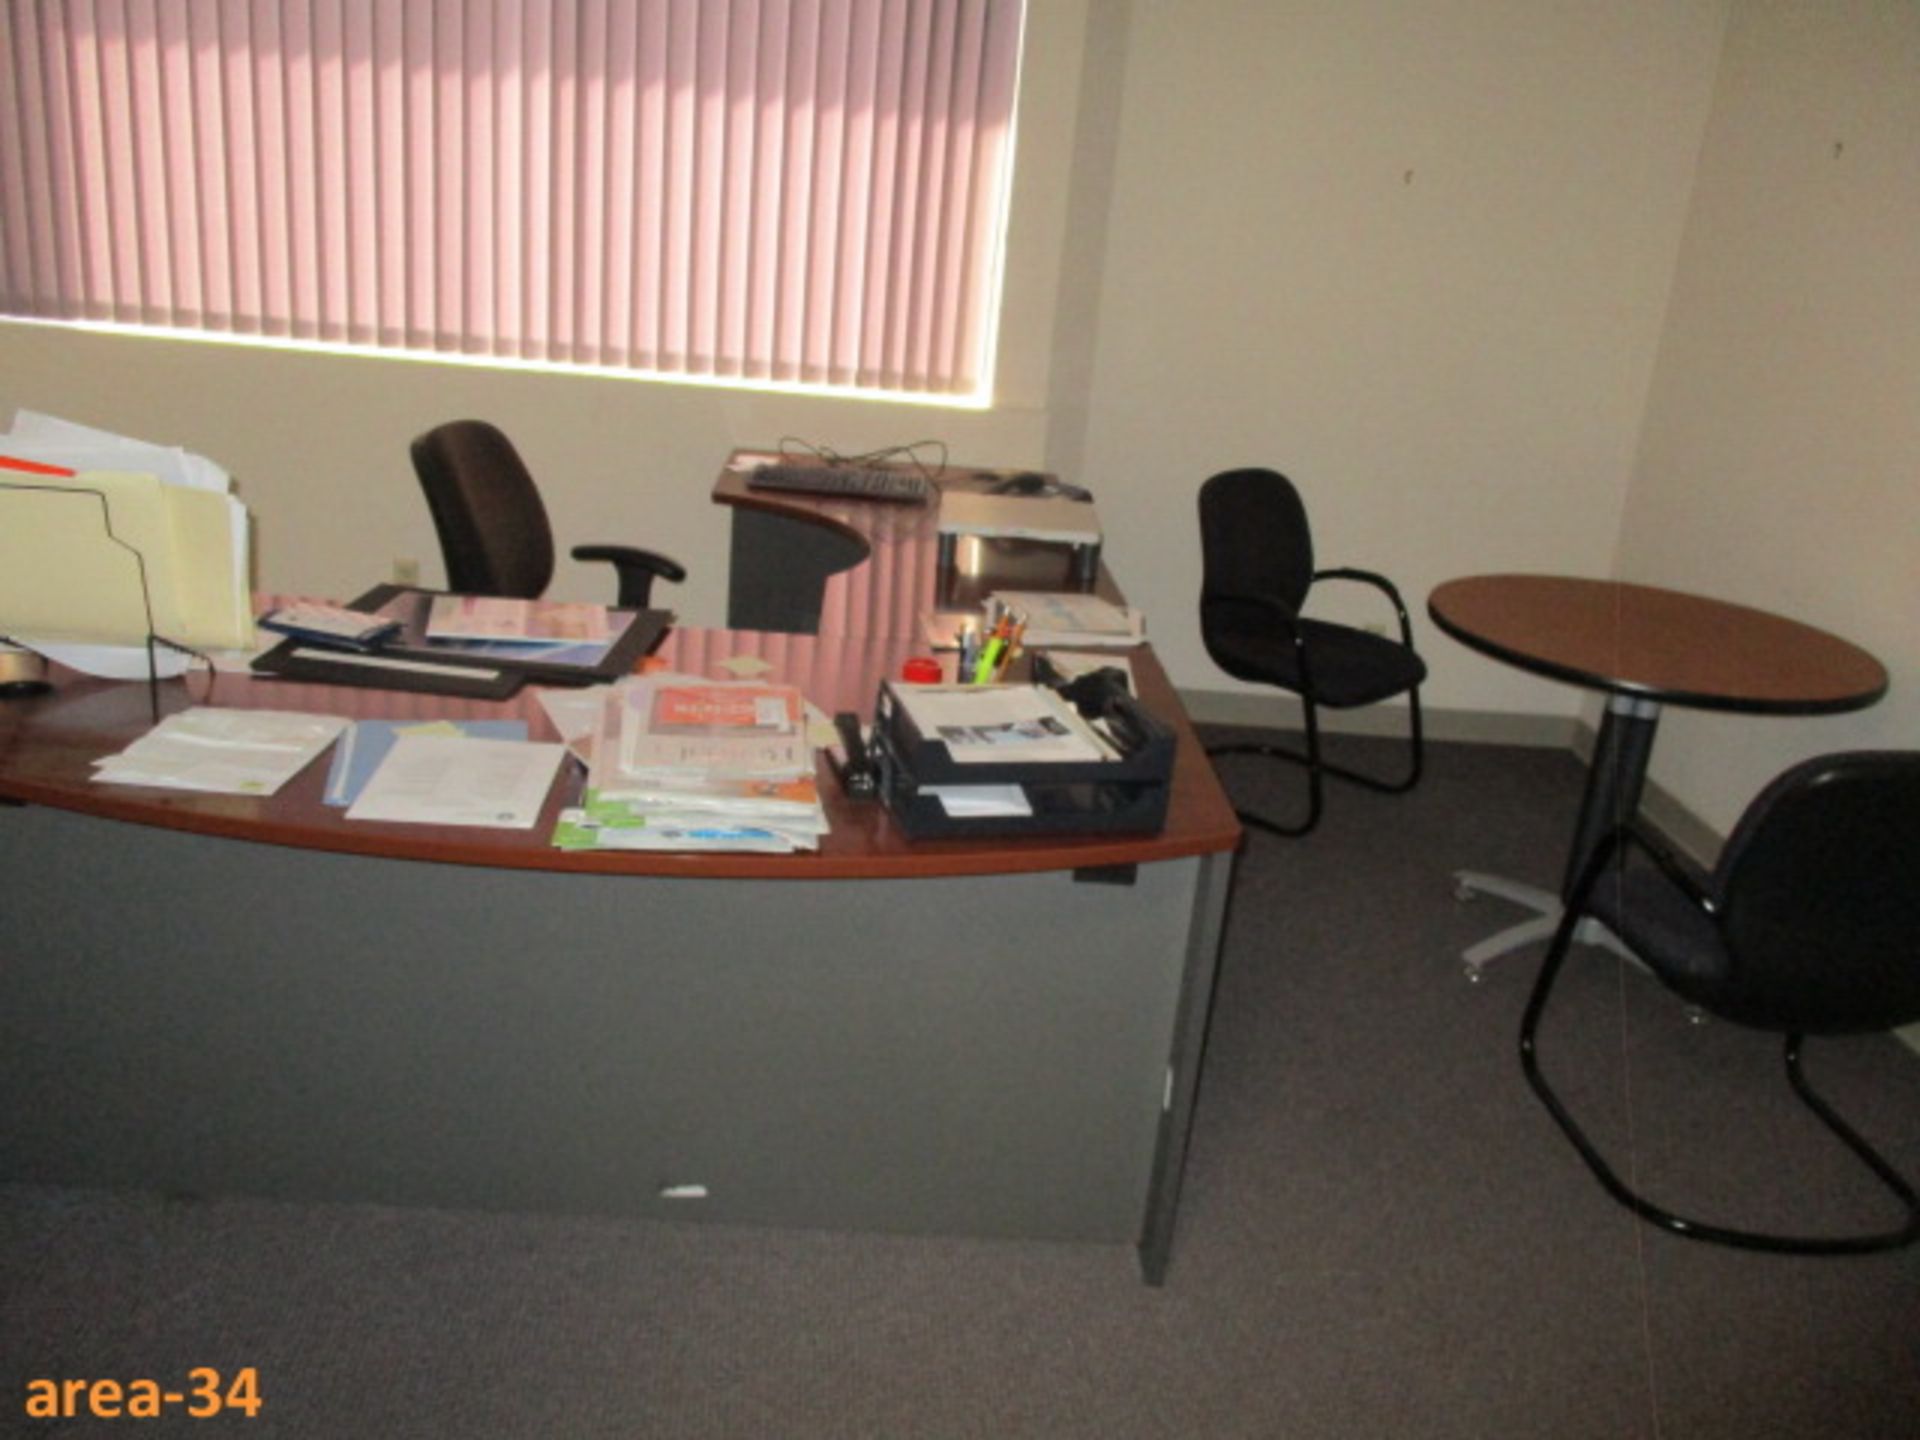 Office Furniture Without Contents (Furniture Of 6 Rooms). Consisting Of: [ Qty-1 L-Shape Wood Desk - Image 15 of 16